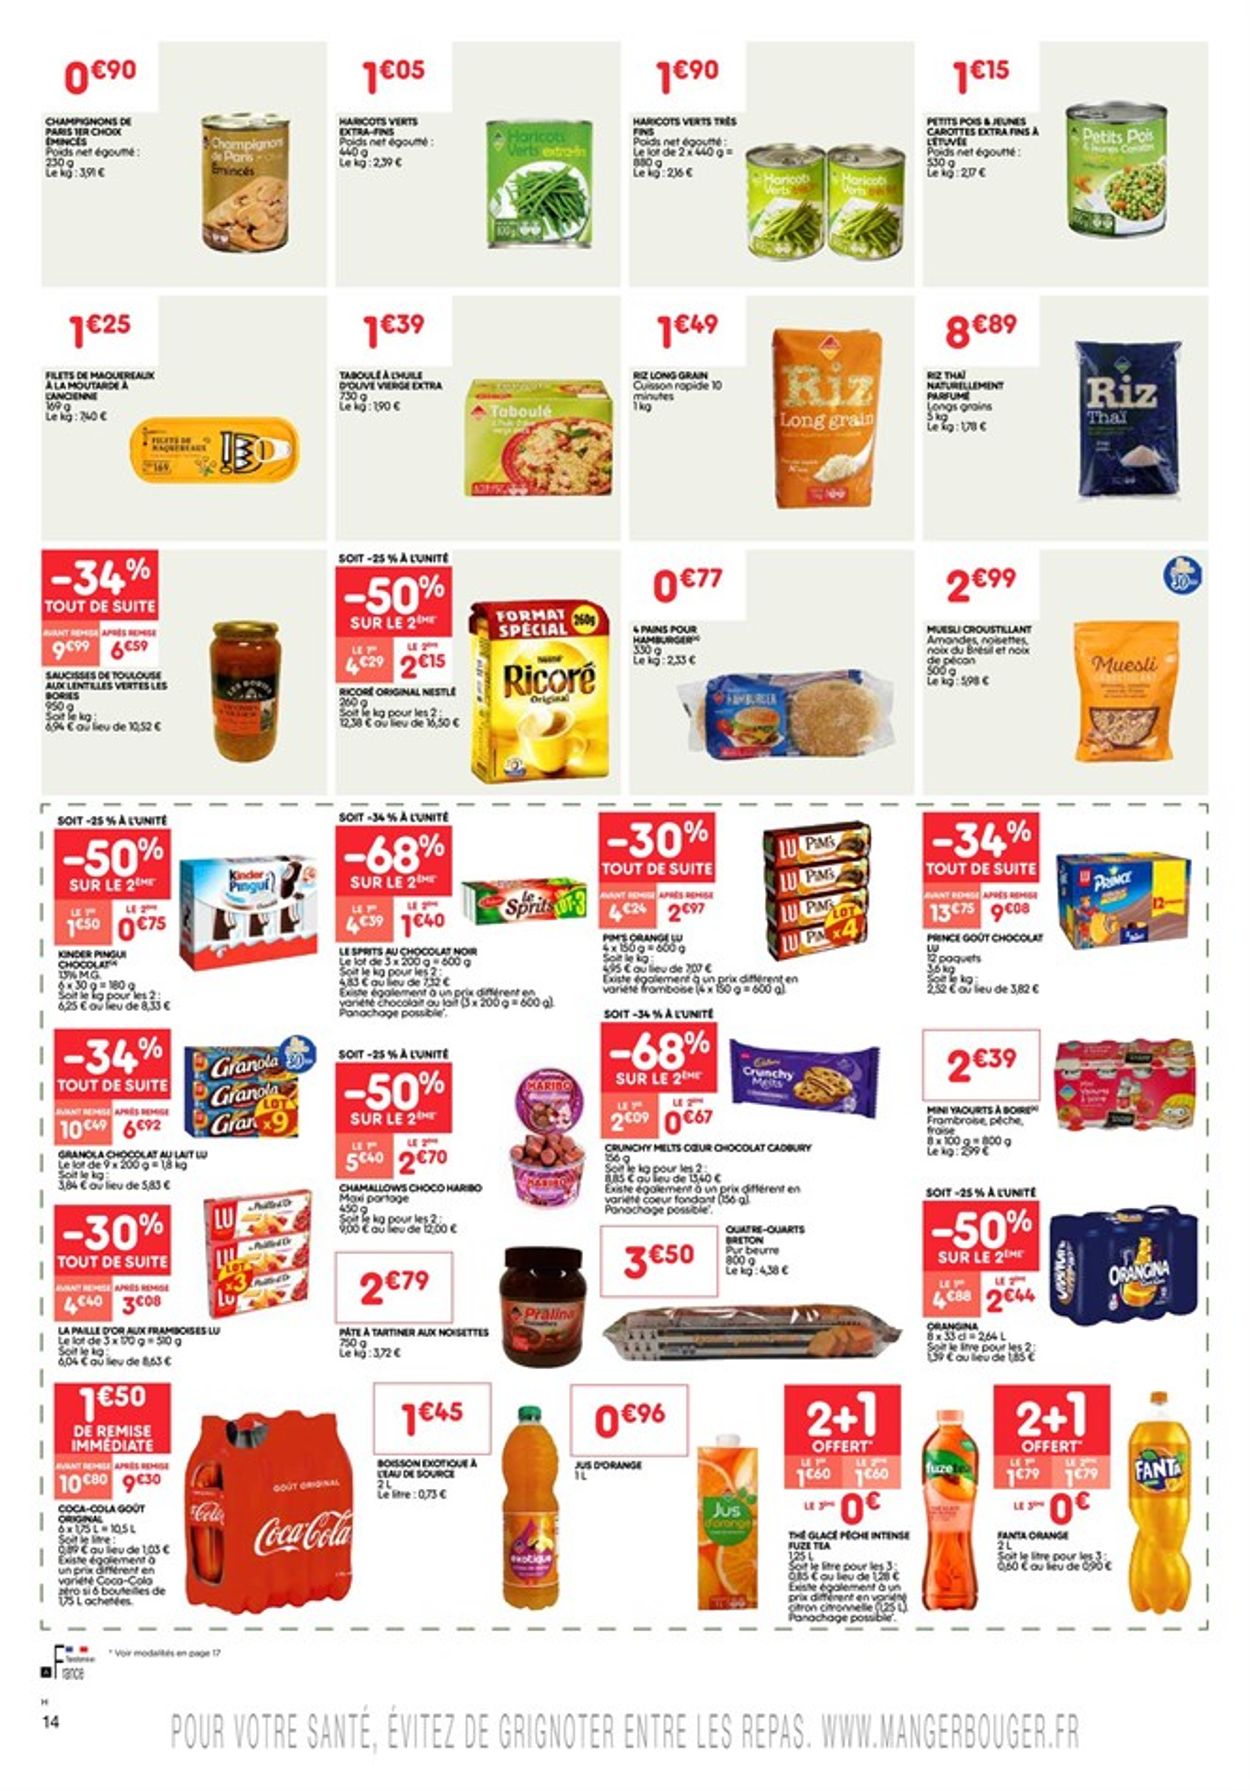 Leader Price Catalogue - 01.10-13.10.2019 (Page 14)